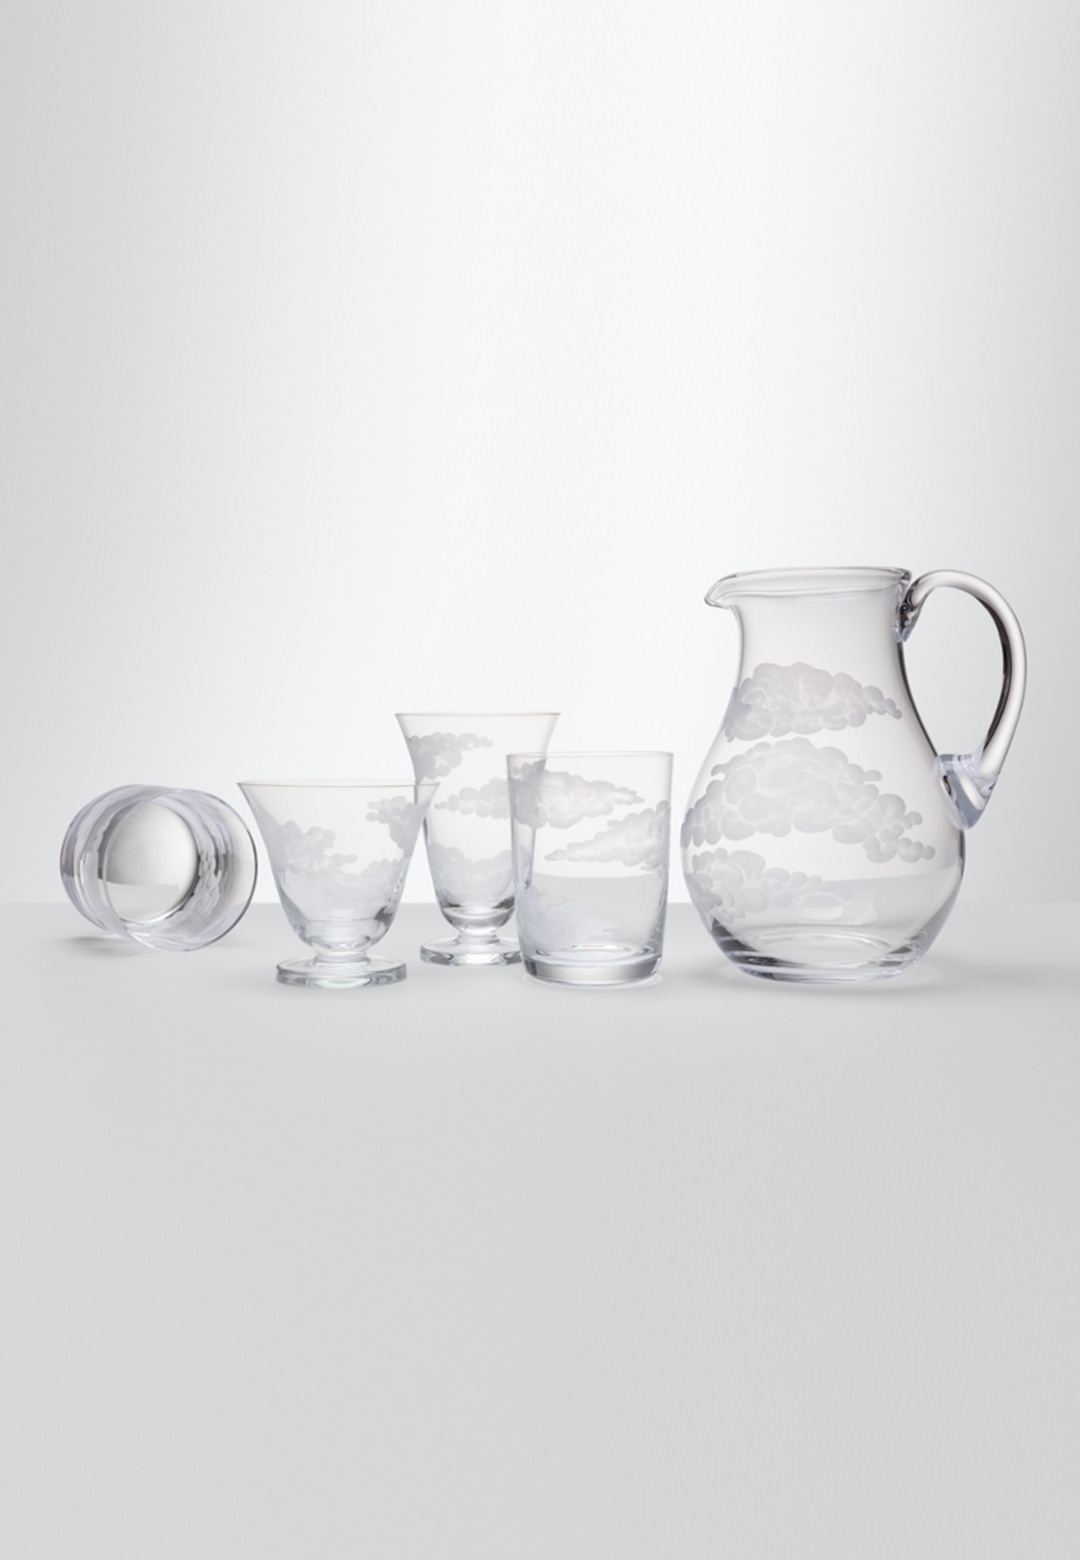 Jonathan Hansen’s new glassware collection is reflective of a clear blue sky